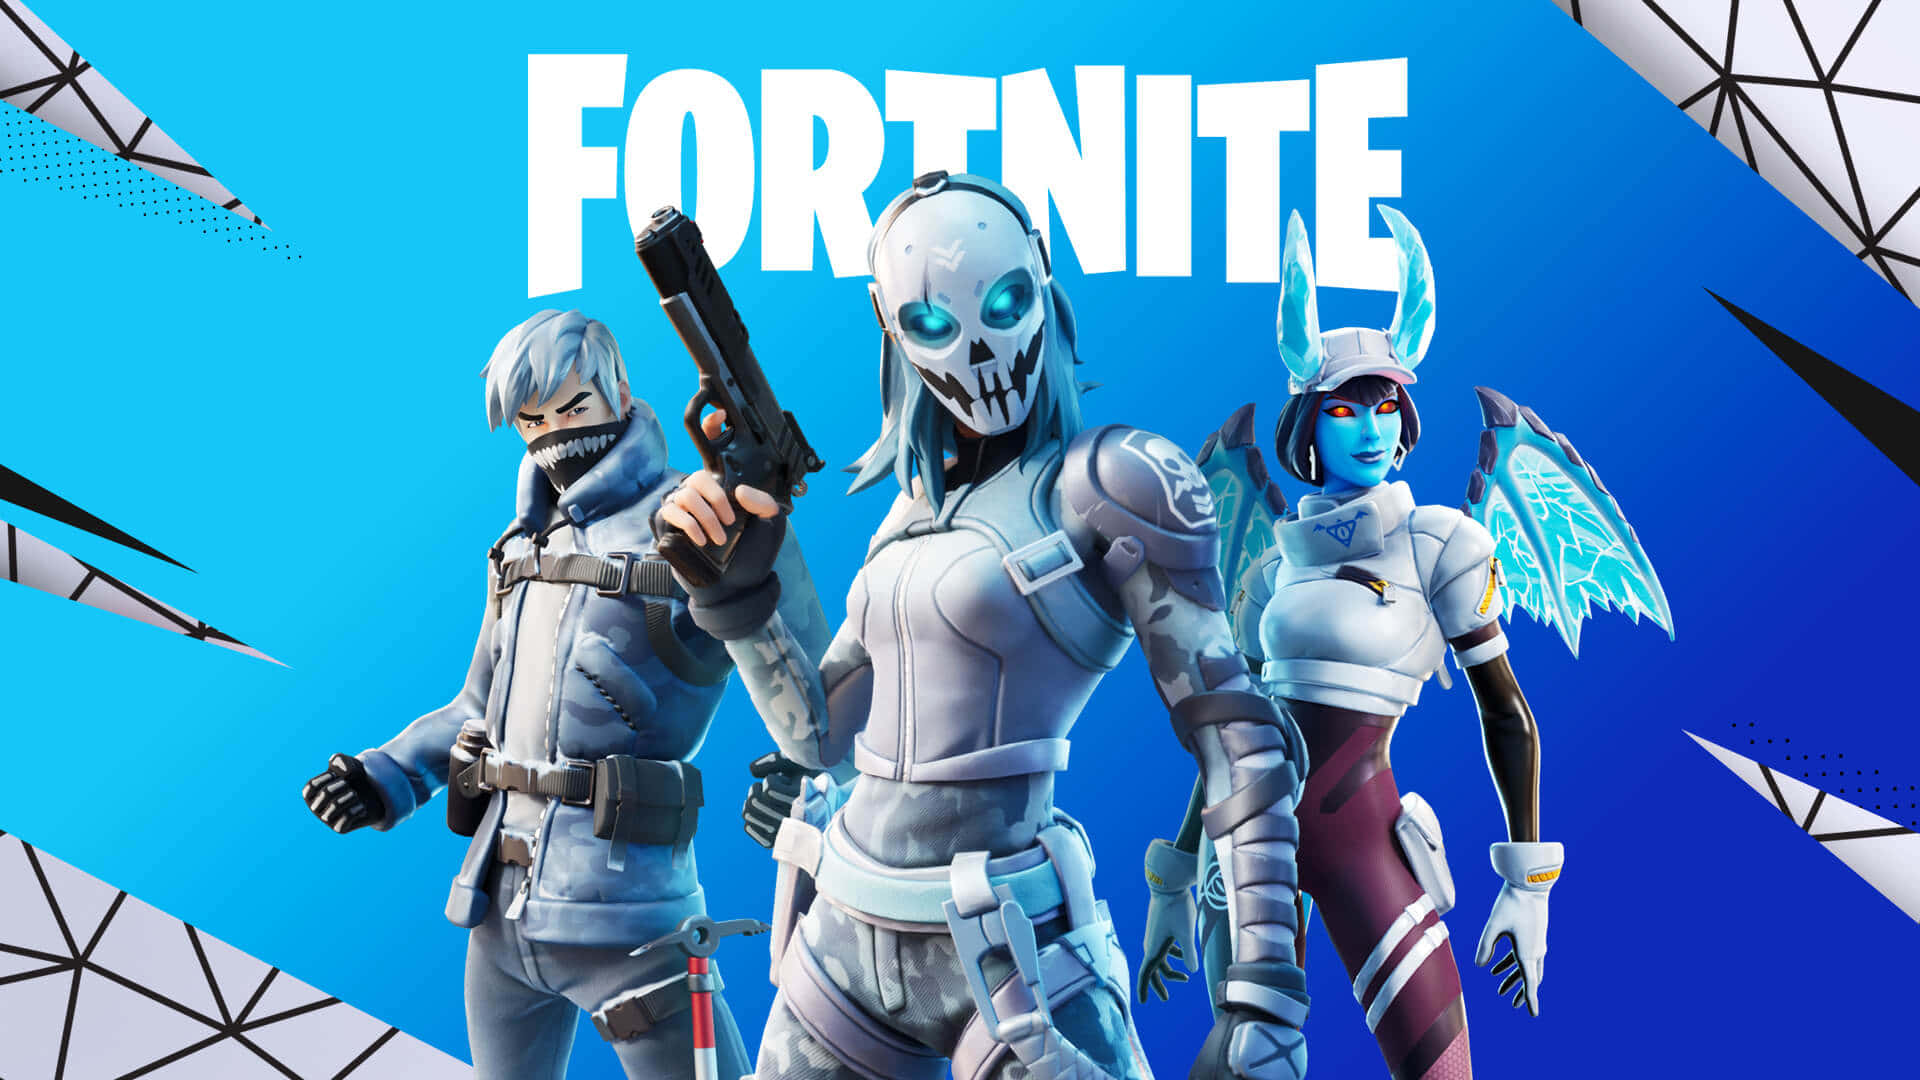 Epic Games Forums Hacked, 800,000 User Accounts Exposed | Threatpost